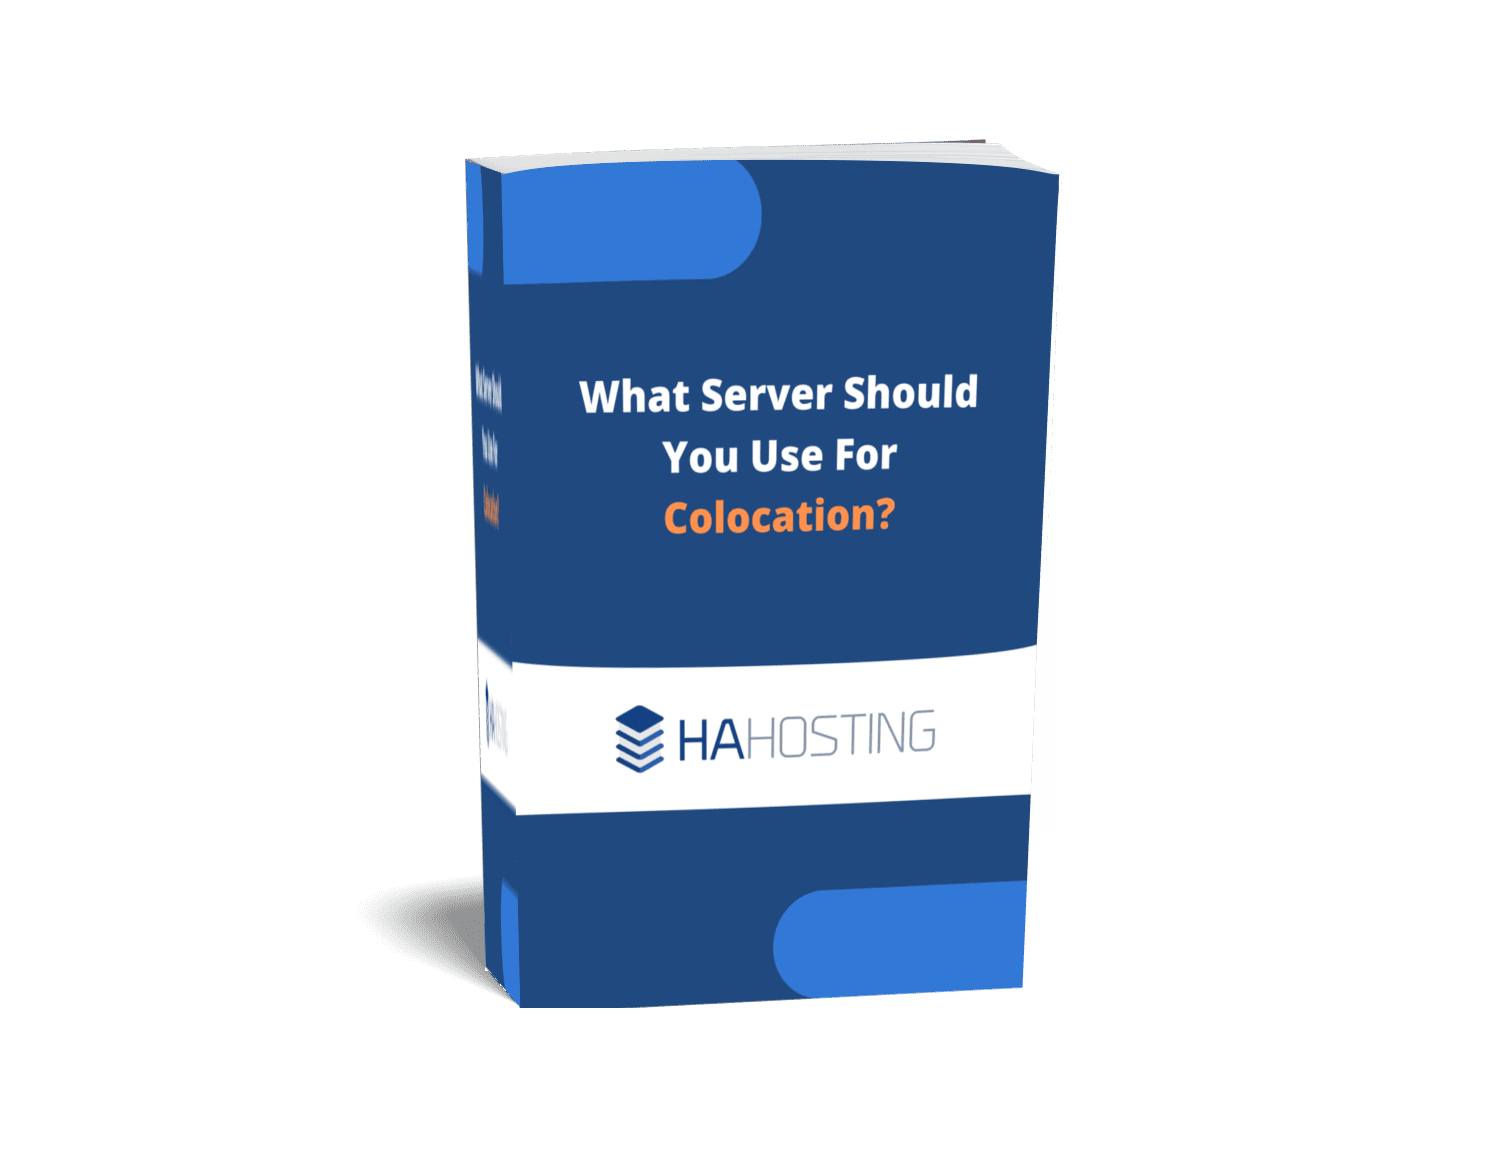 what server should you use for colocation?